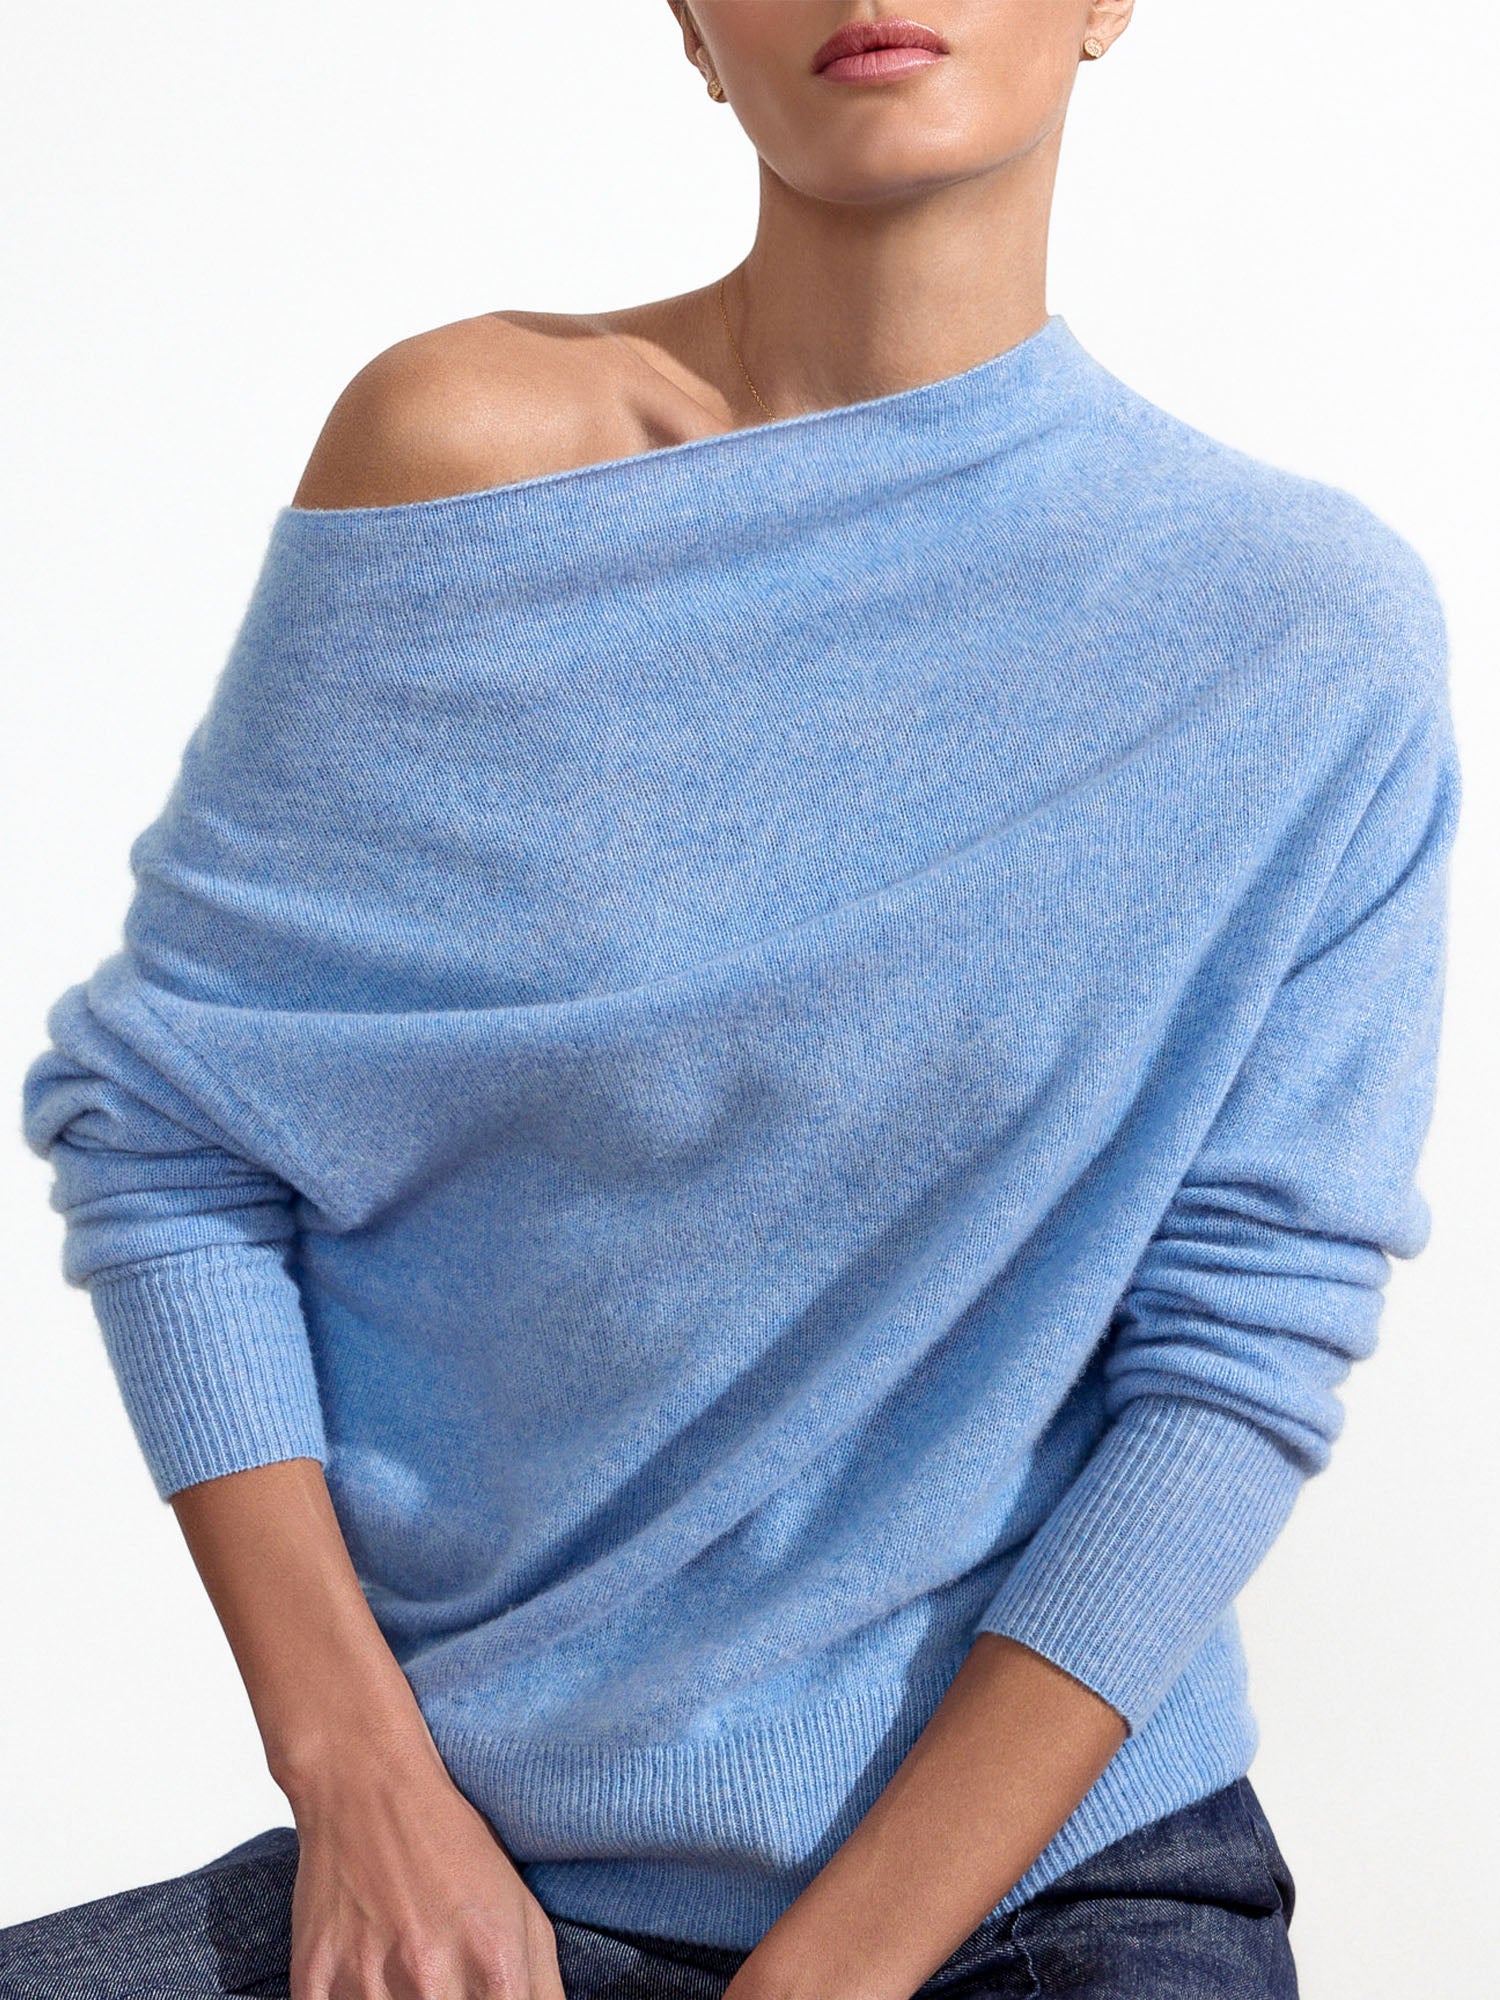 Lori cashmere off shoulder blue sweater front view